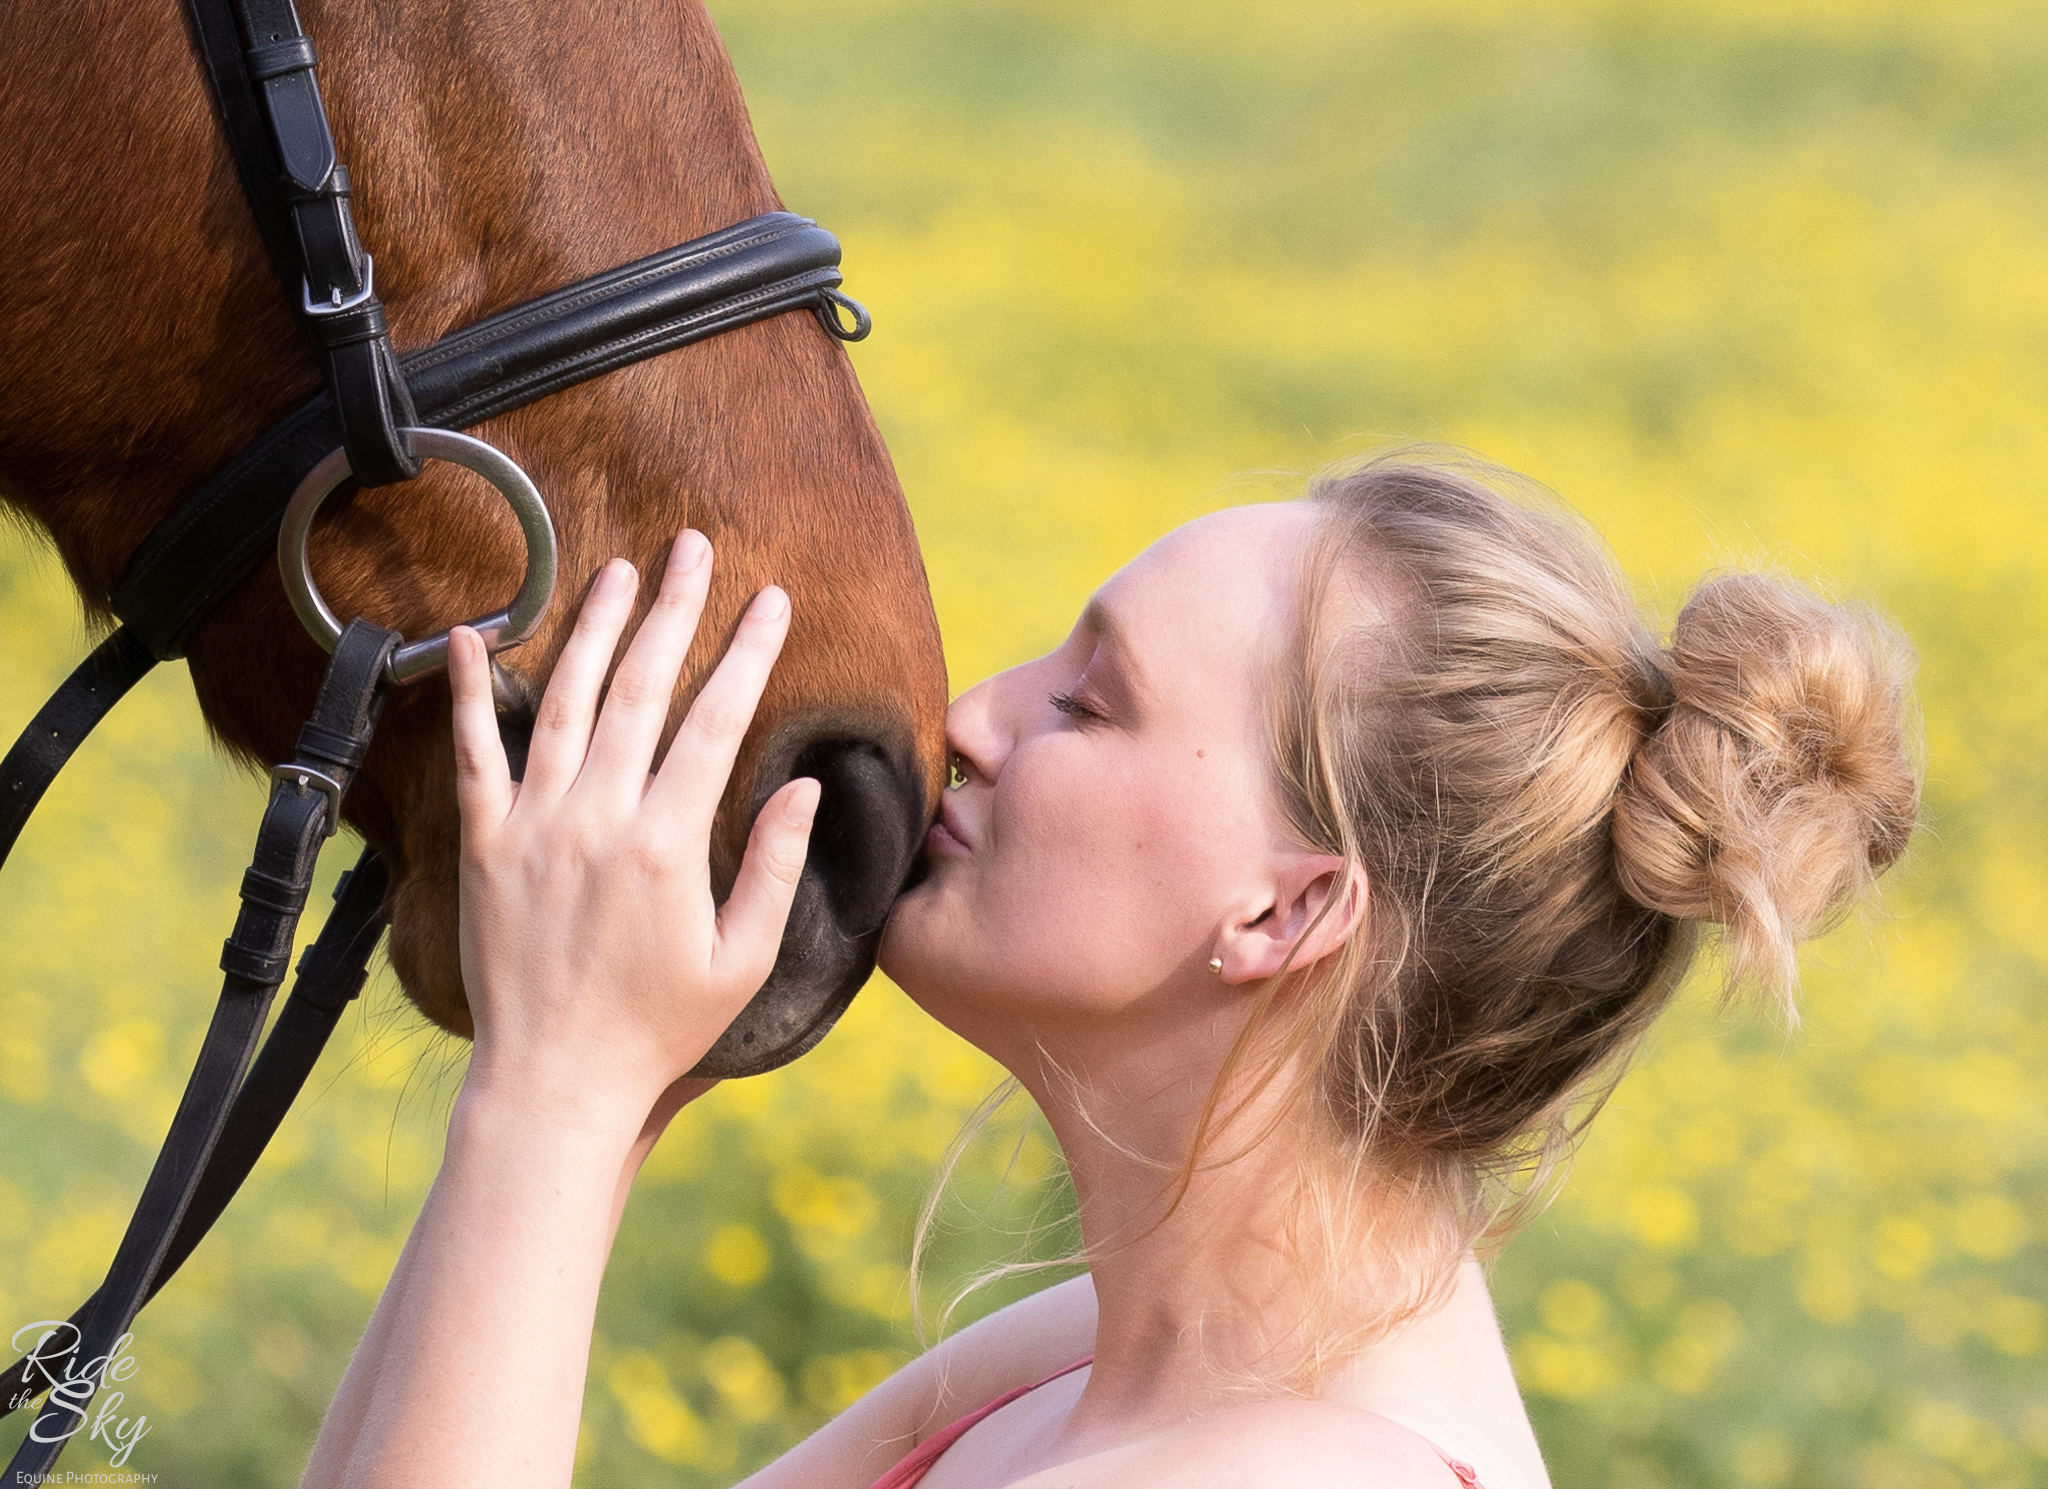 woman kissing horse muzzle in yellow flower field